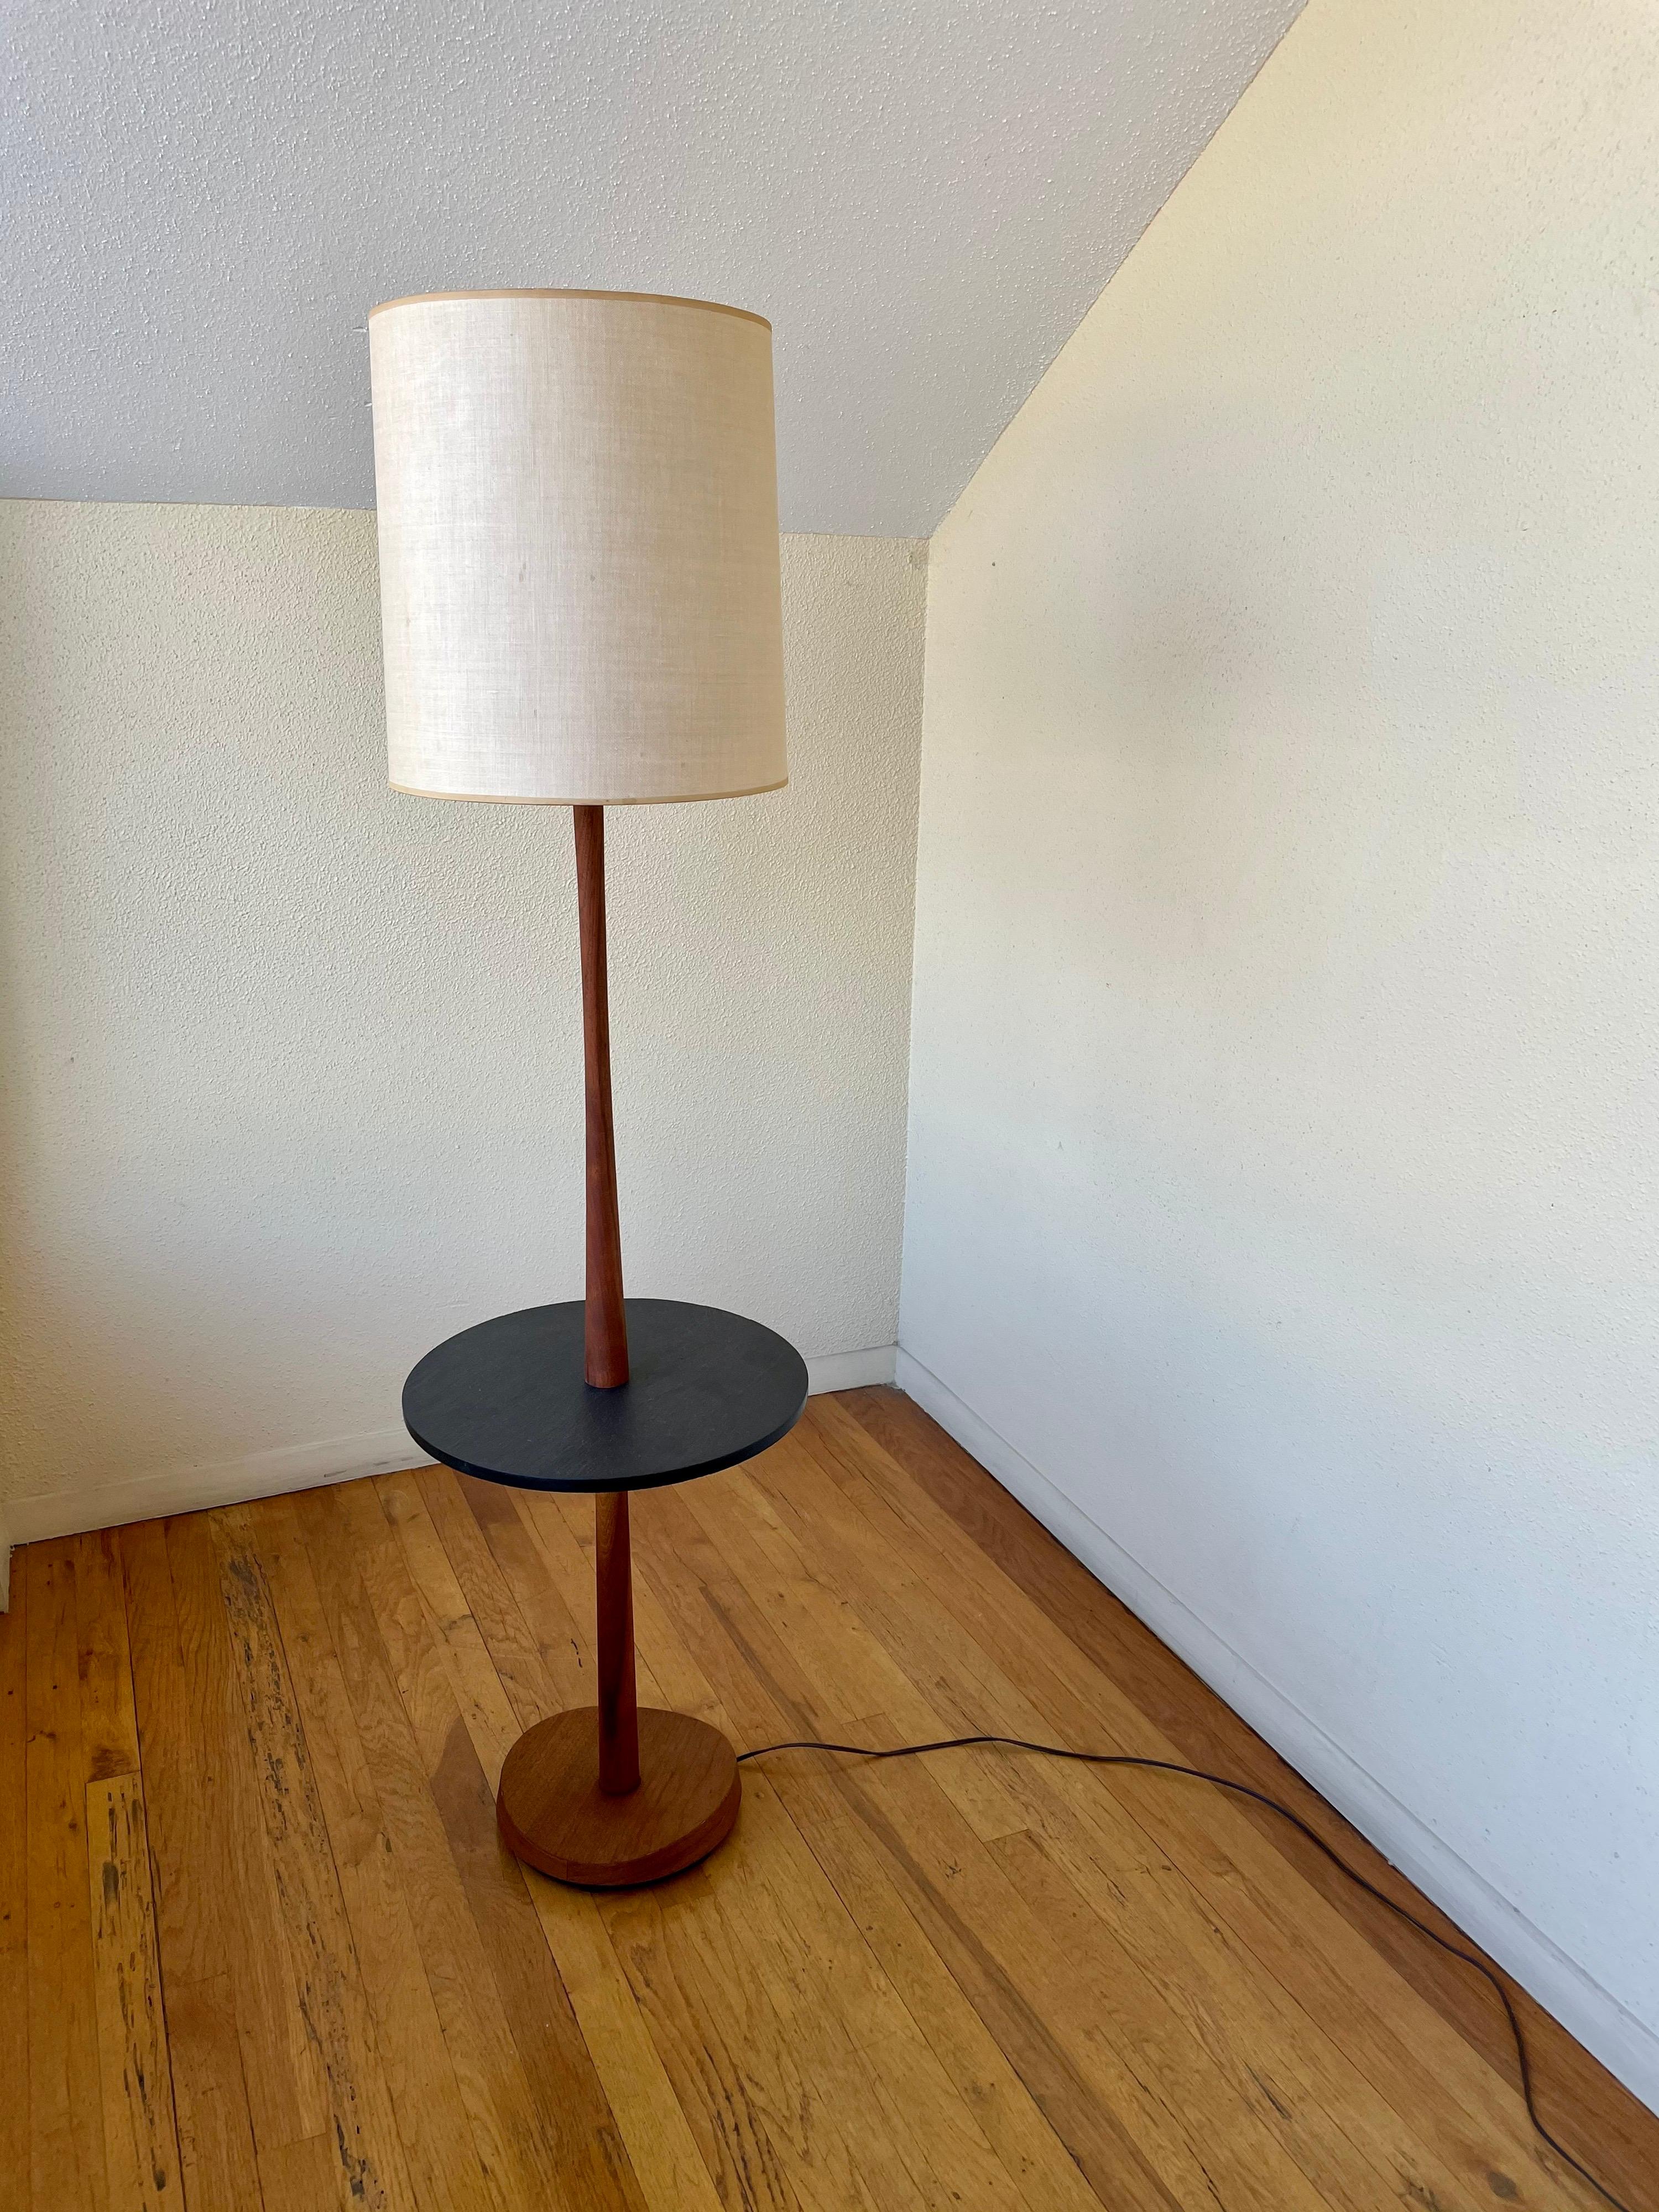 Beautiful and rare floor table lamp in teak with slate table floor lamp circa 1960's , all original we took it apart cleaned and oiled the lampshade its original, its in perfect working condition.